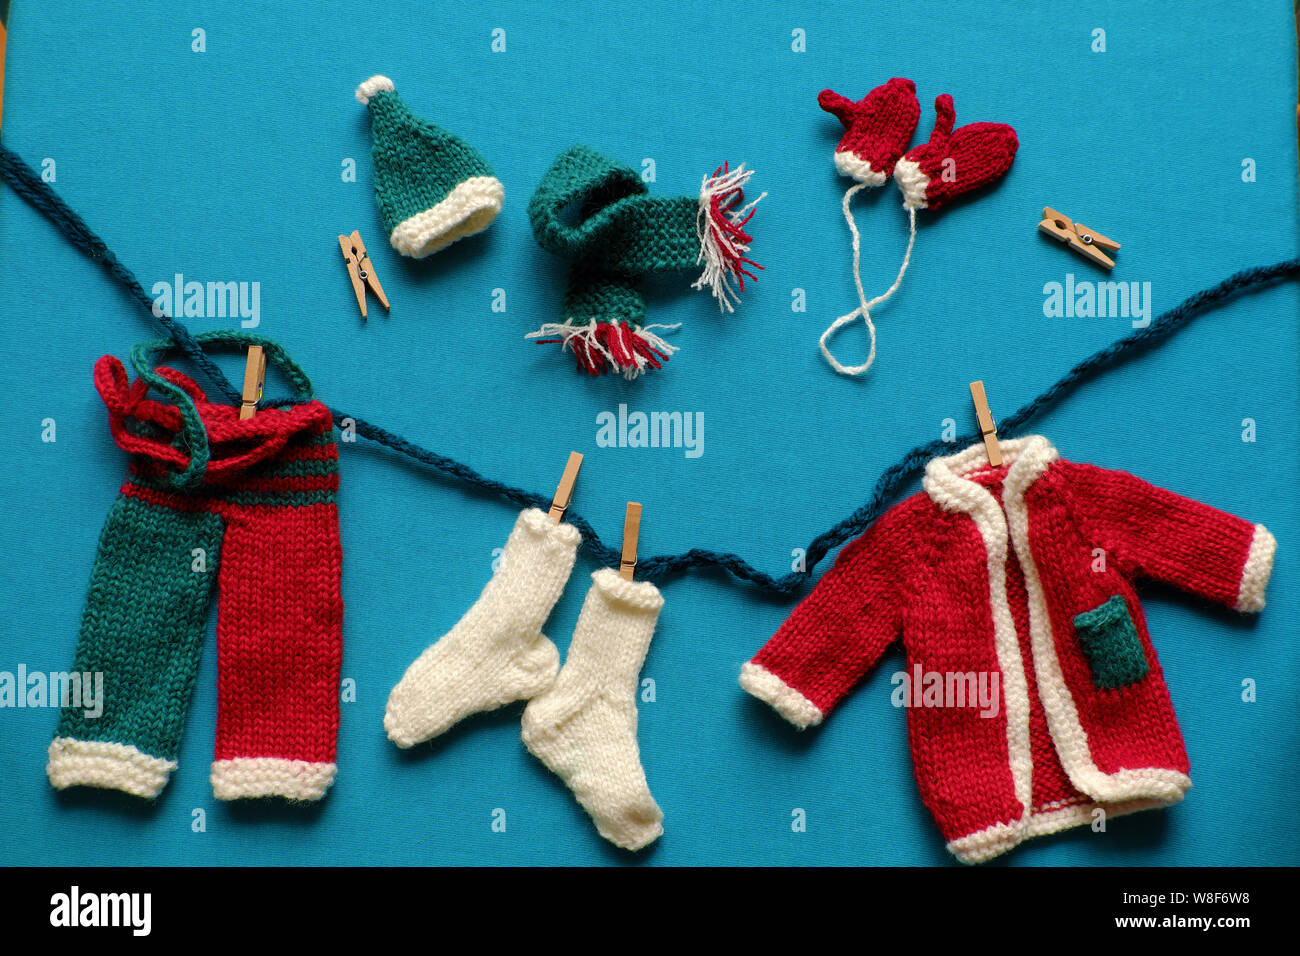 Top view of Santa clothes with accessories as gloves, hat, scarf, socks in white, red and green knit from yarn on blue background, small decorations Stock Photo